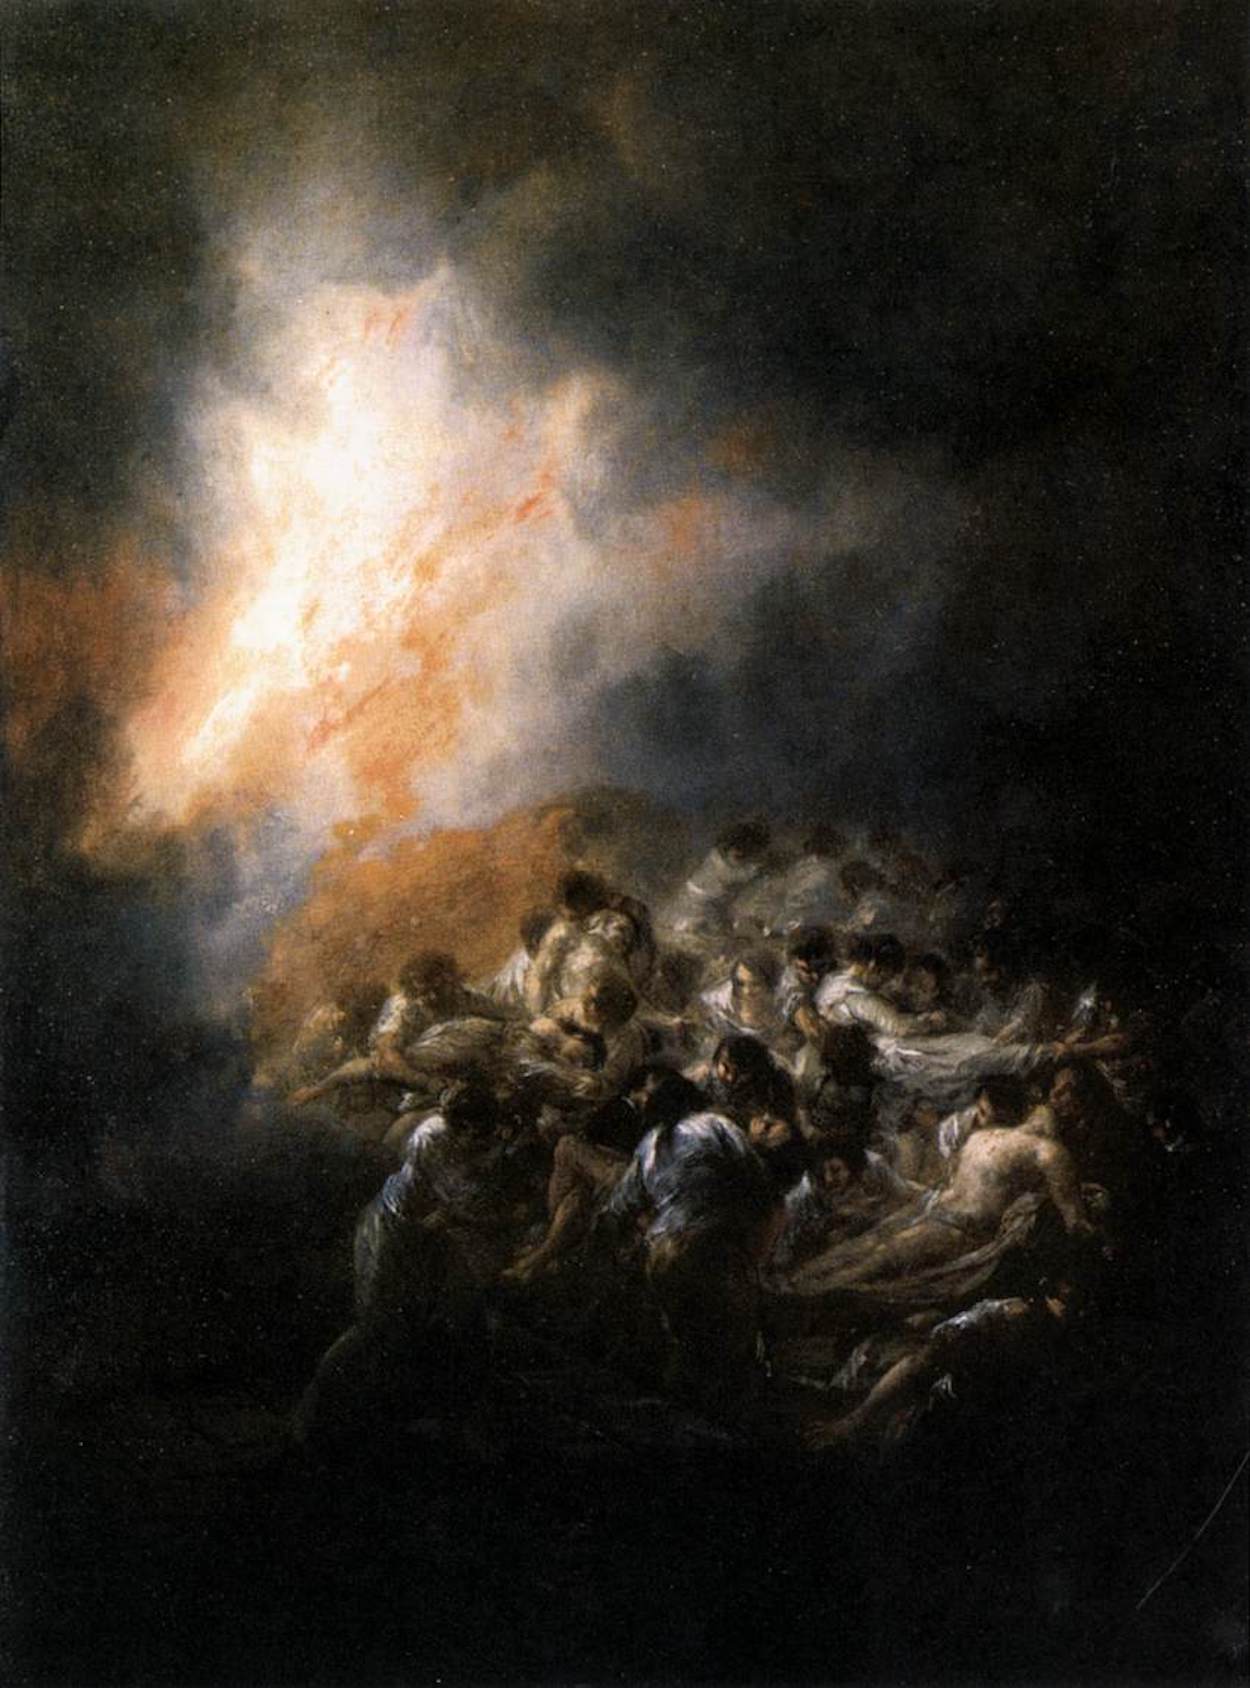 Fire at Night by Francisco Goya - 1794 - 50 x 32 cm private collection